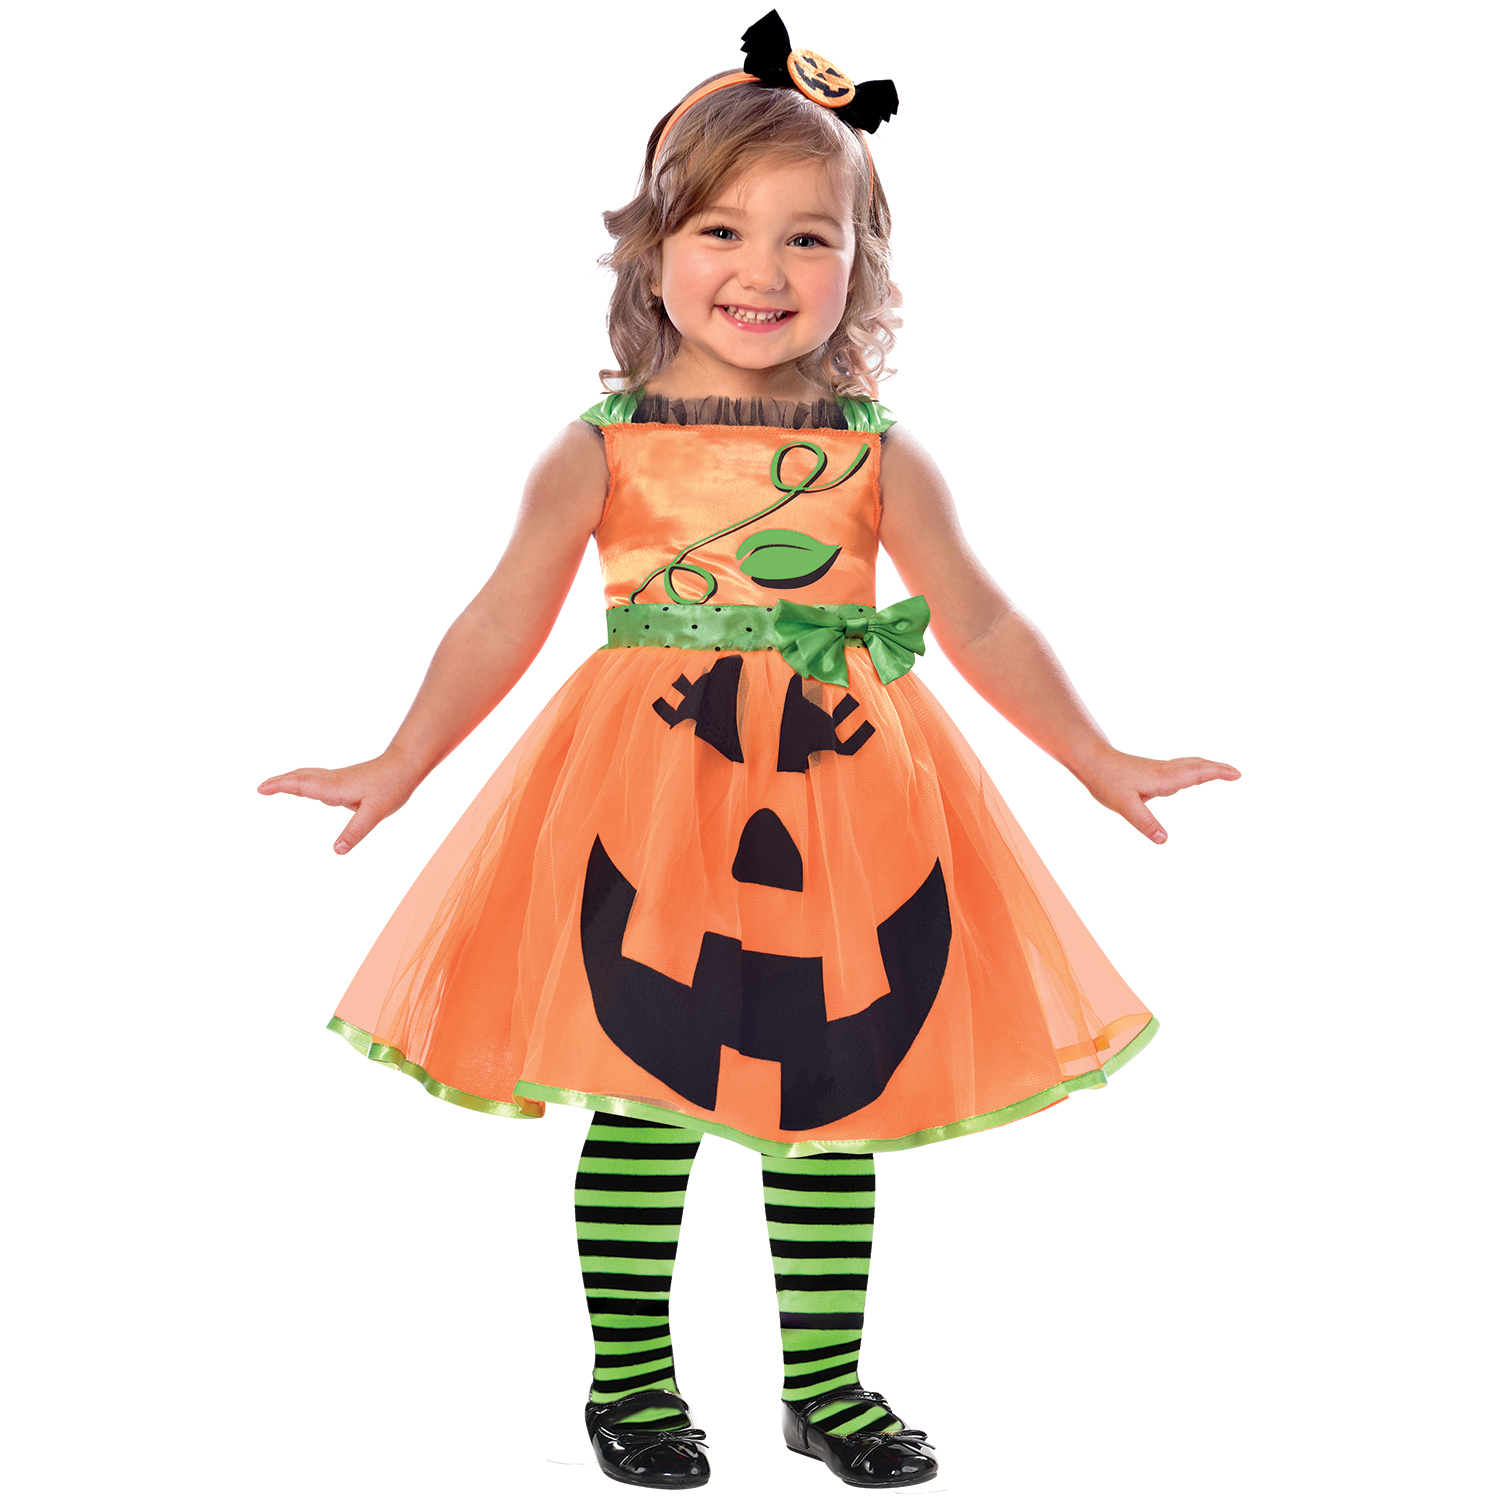 baby pumpkin outfit uk